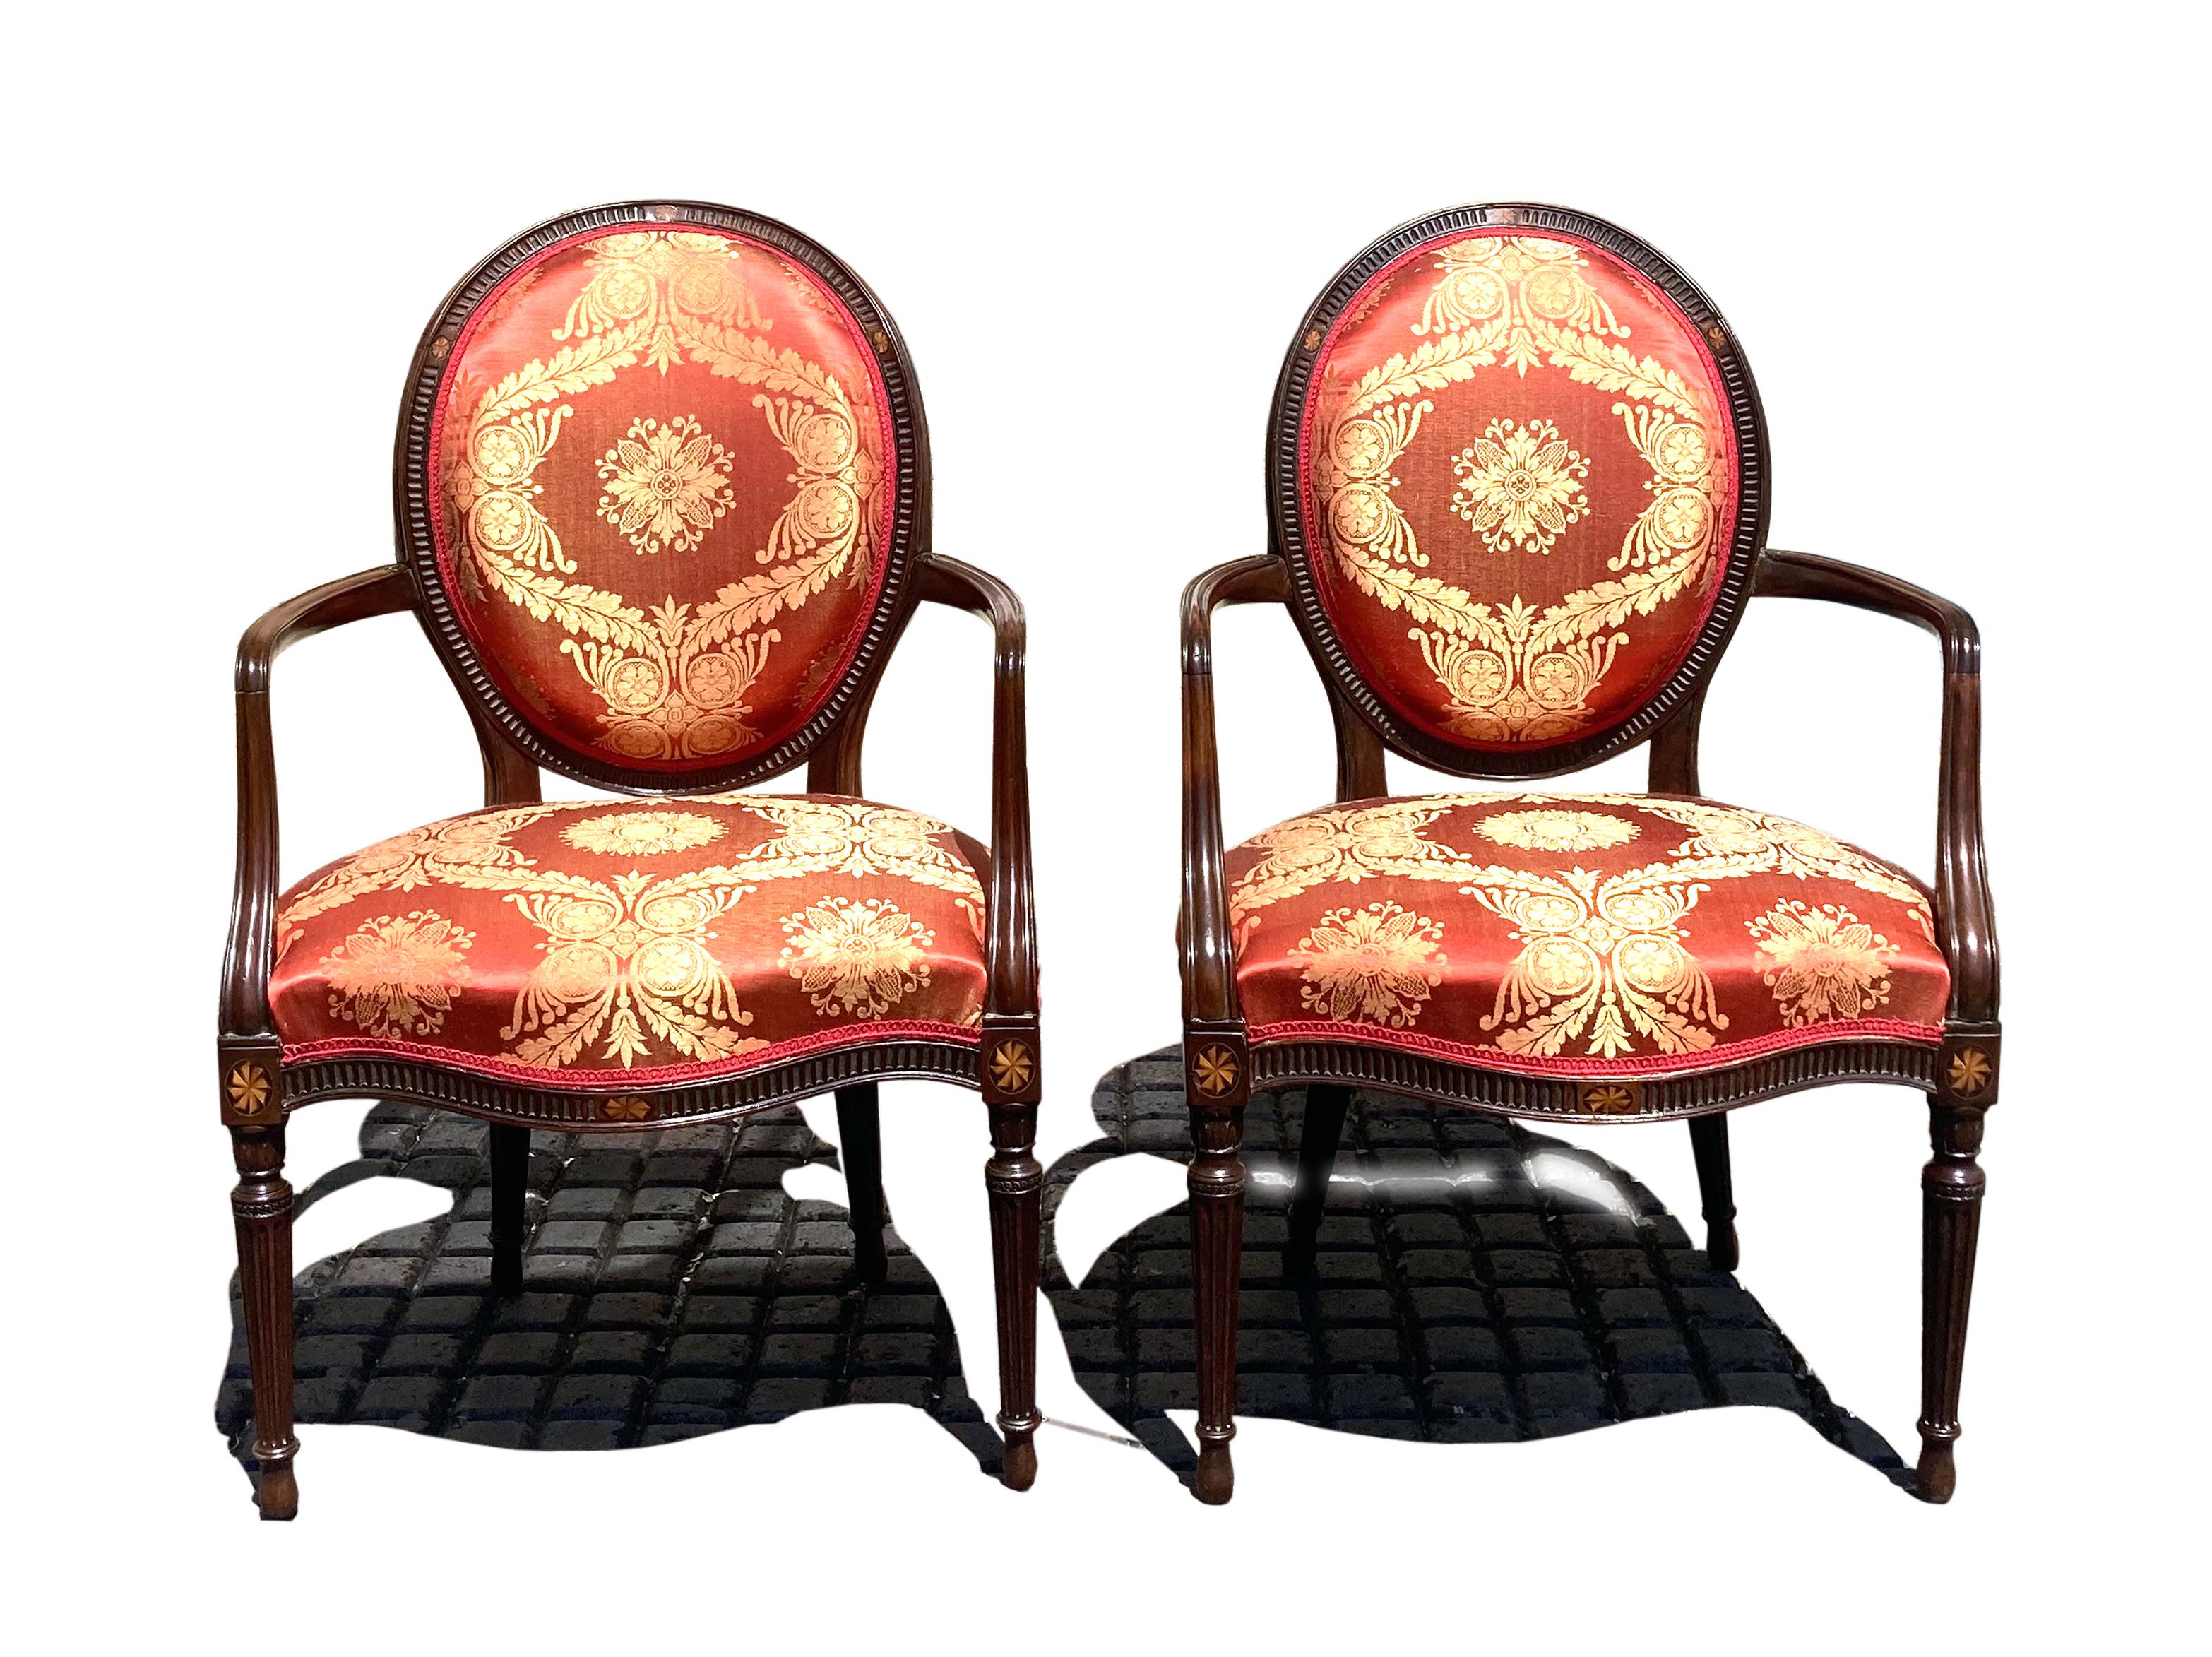 Pair of George III Mahogany Armchairs in Red Damask; Manner of John Linnell In Good Condition For Sale In Bradford-on-Avon, Wiltshire